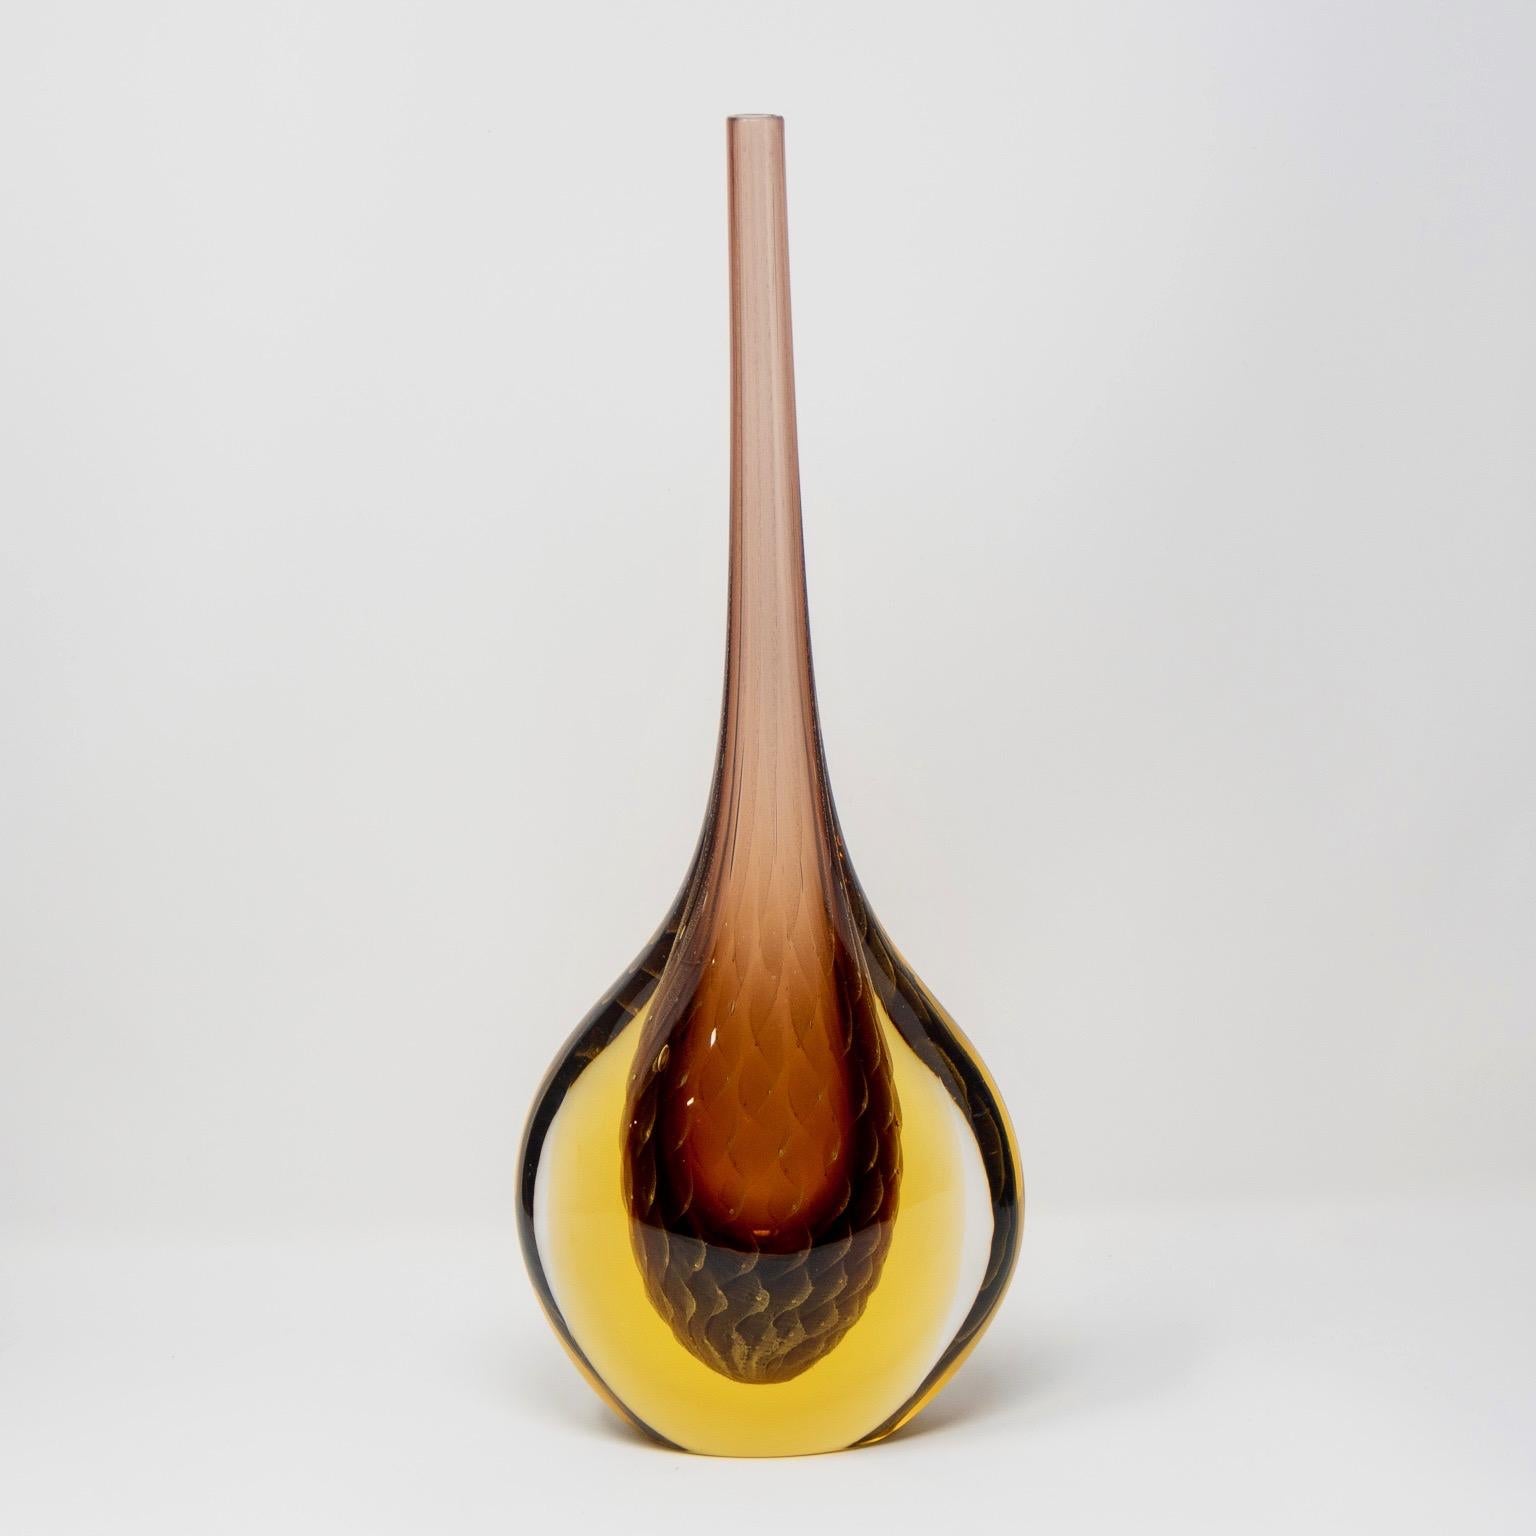 Tall, narrow-necked Murano glass Sommerso style vase in amber and warm taupe, circa 1970s. L. Onesto etched signature on underside of base.